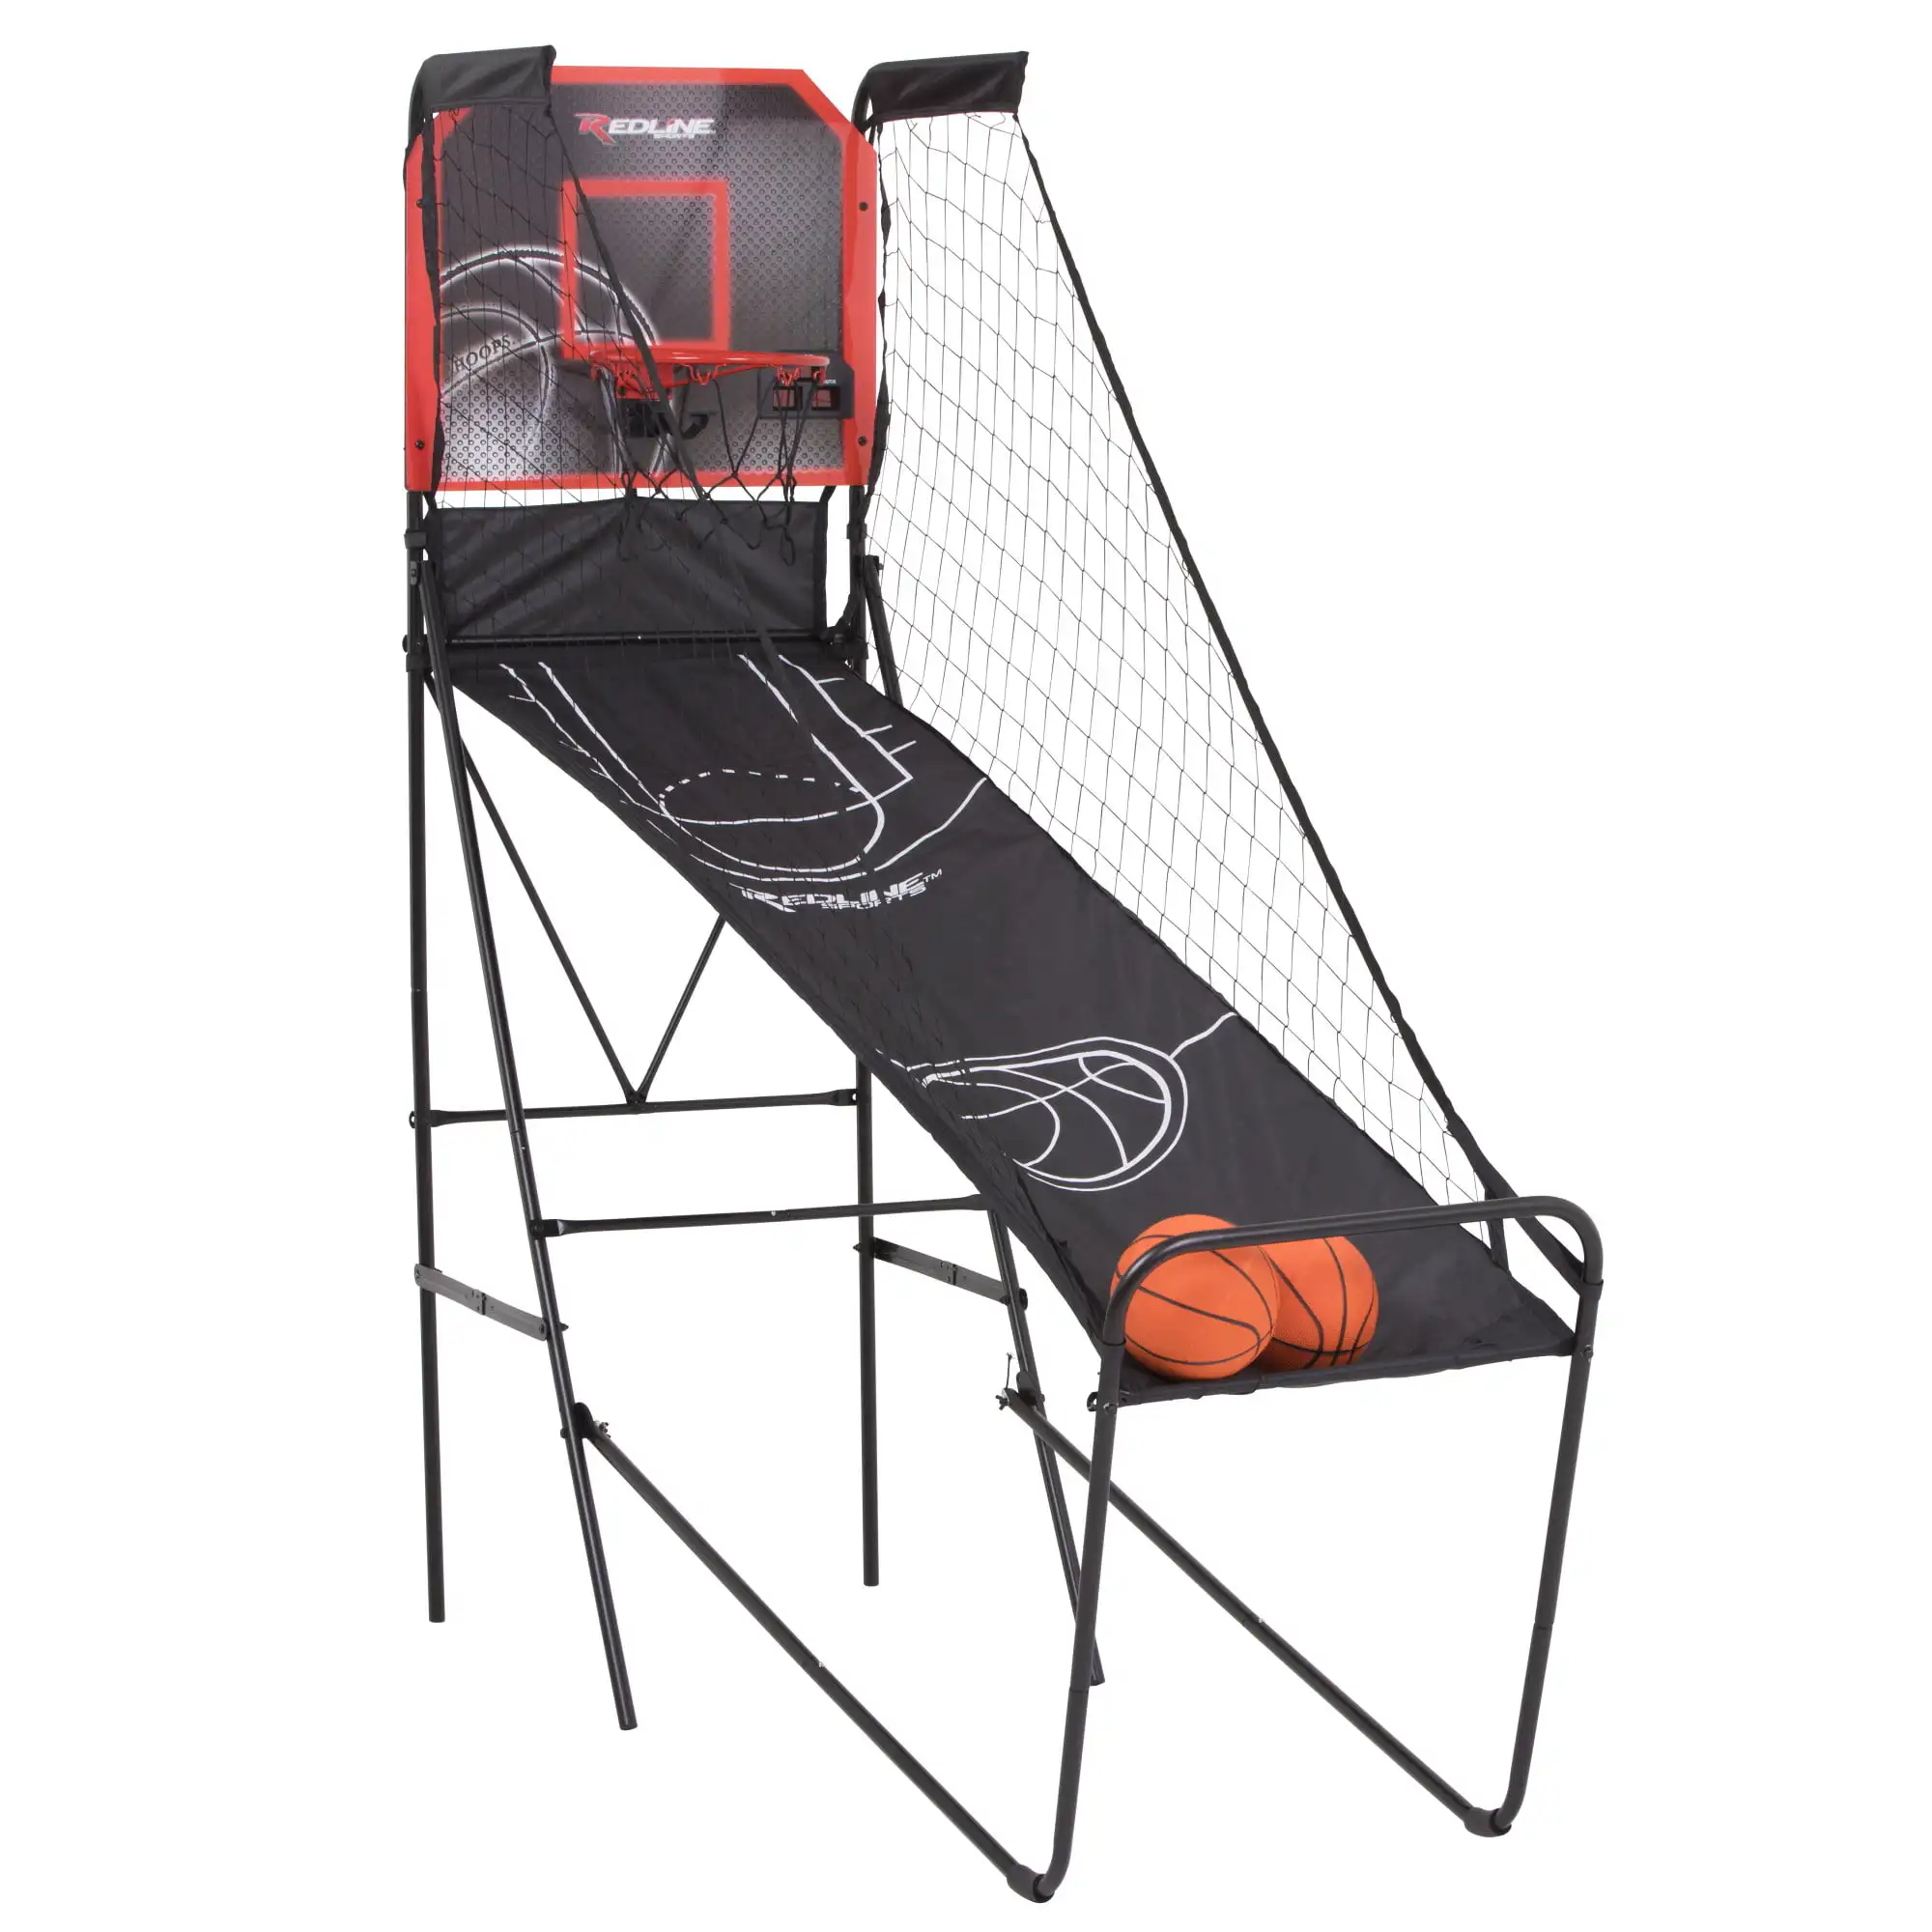 

Redline Alley-oop Single Basketball Shootout with Quick Connect Easy-to-Assemble Frame and Compact Fold-up Design